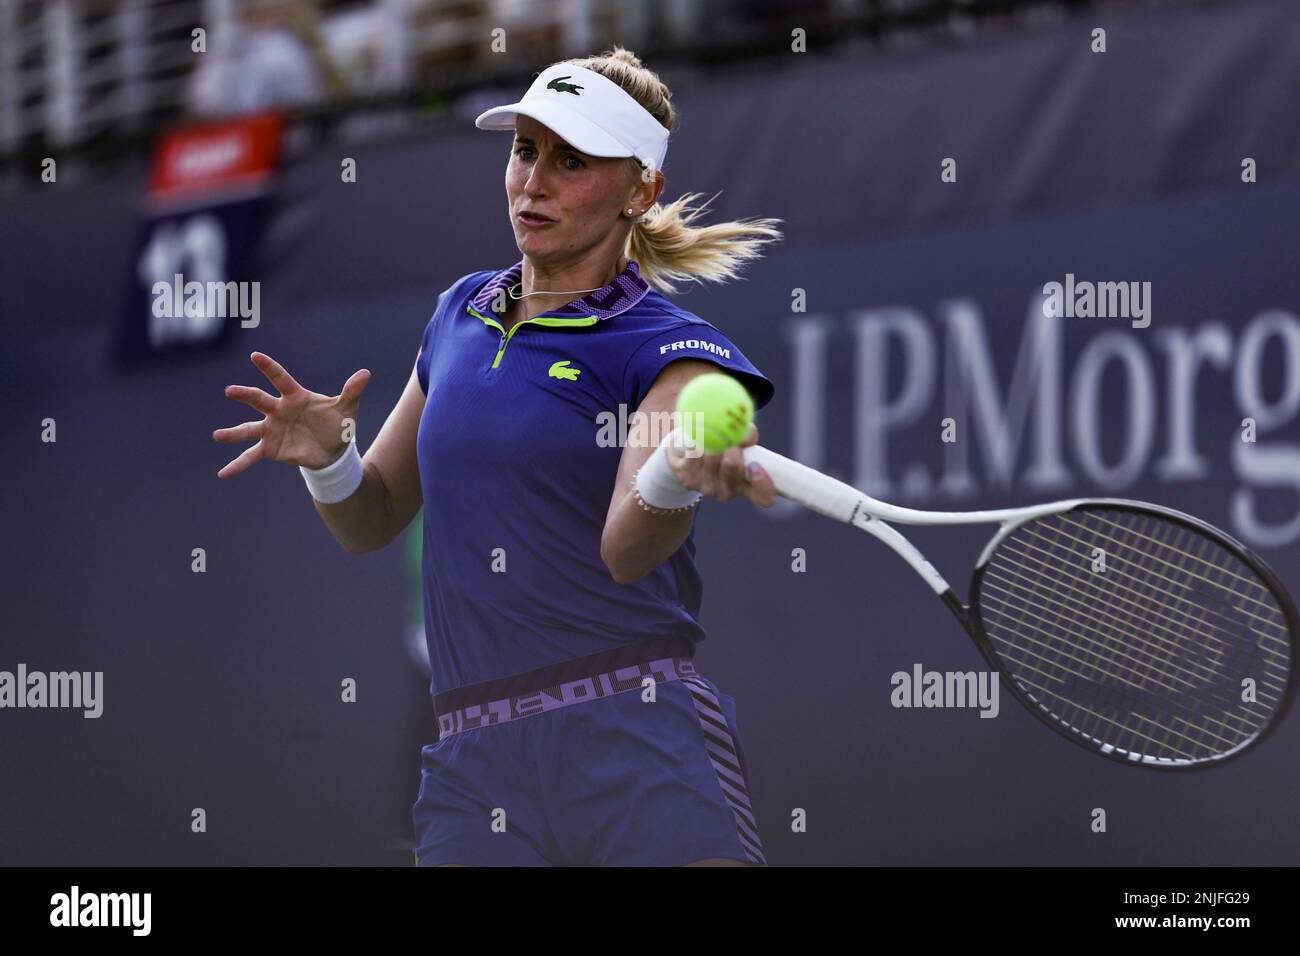 Jil Teichmann in action during a womens singles match at the 2022 US Open, Monday, Aug